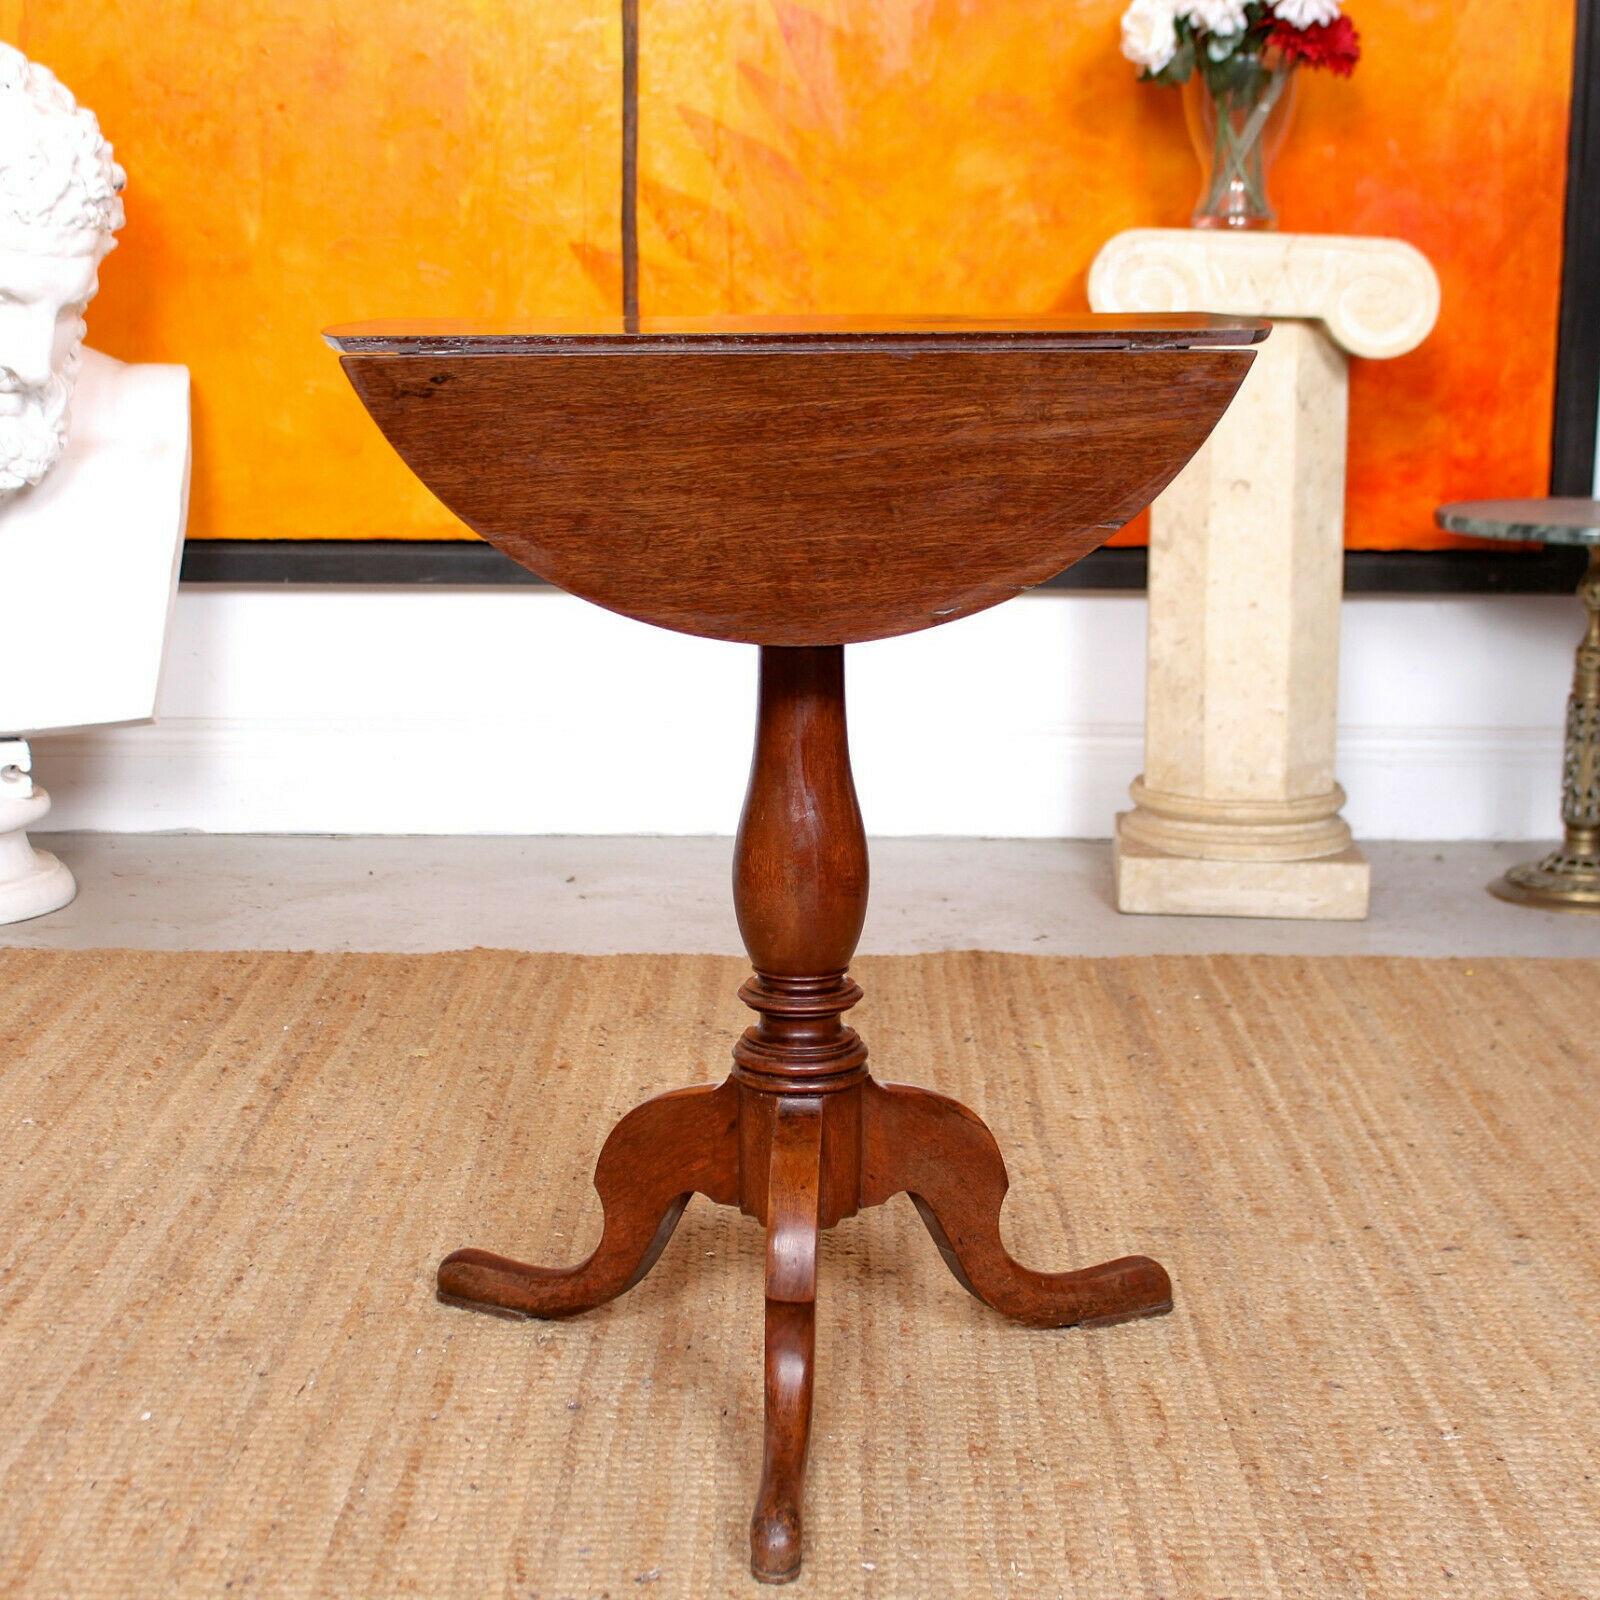 English Side Table Drop-Leaf Tripod 19th Century Mahogany Victorian Side Table For Sale 4